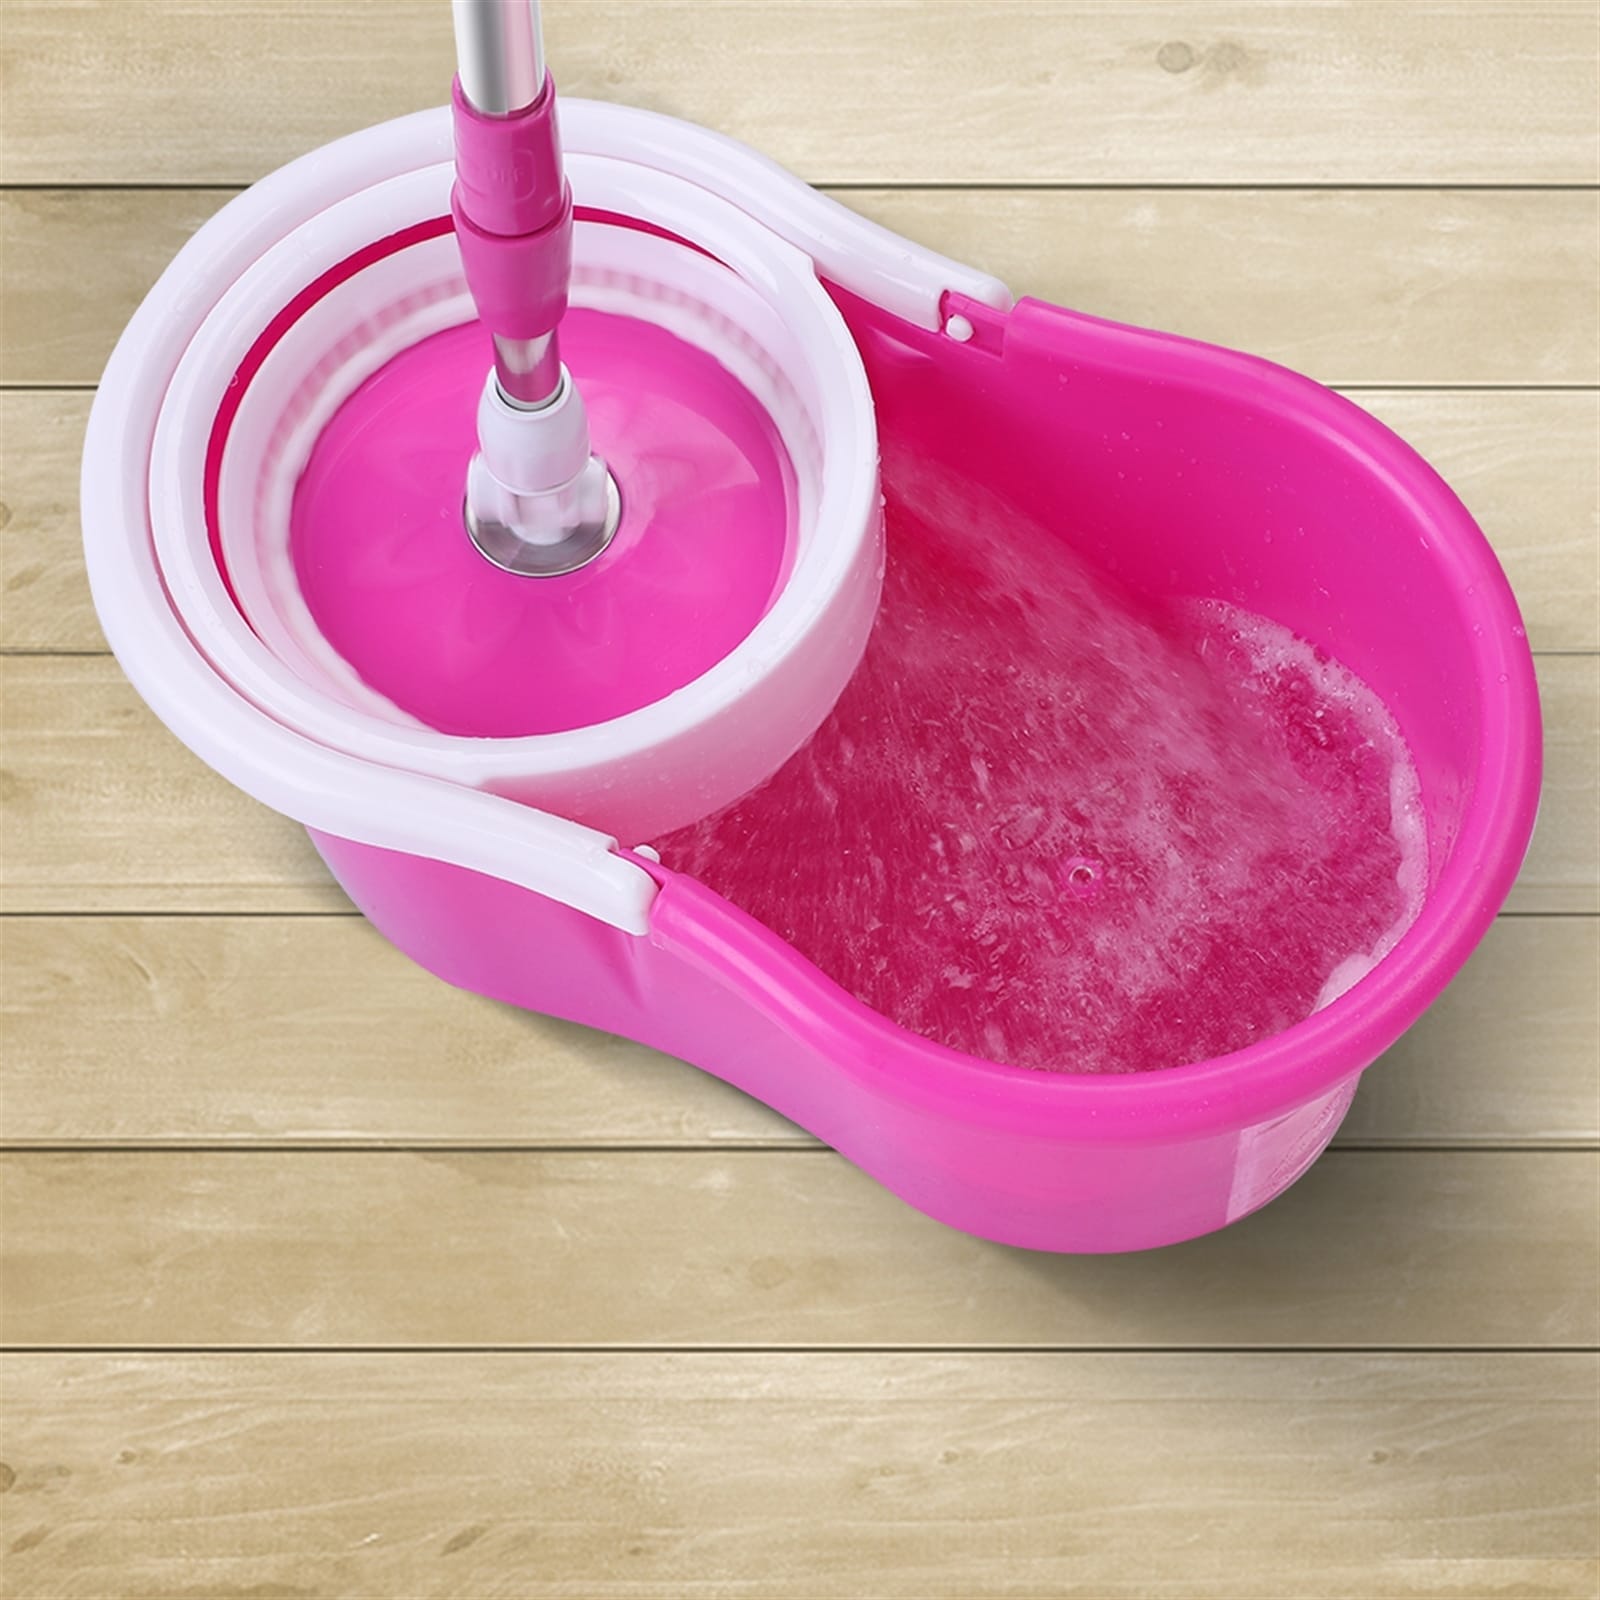 https://ak1.ostkcdn.com/images/products/is/images/direct/db39cf02d71c6b4b91e4b3928aef2abaf4cb41e6/360%C2%B0-Spin-Mop-with-Bucket-%26-Dual-Mop-Heads.jpg